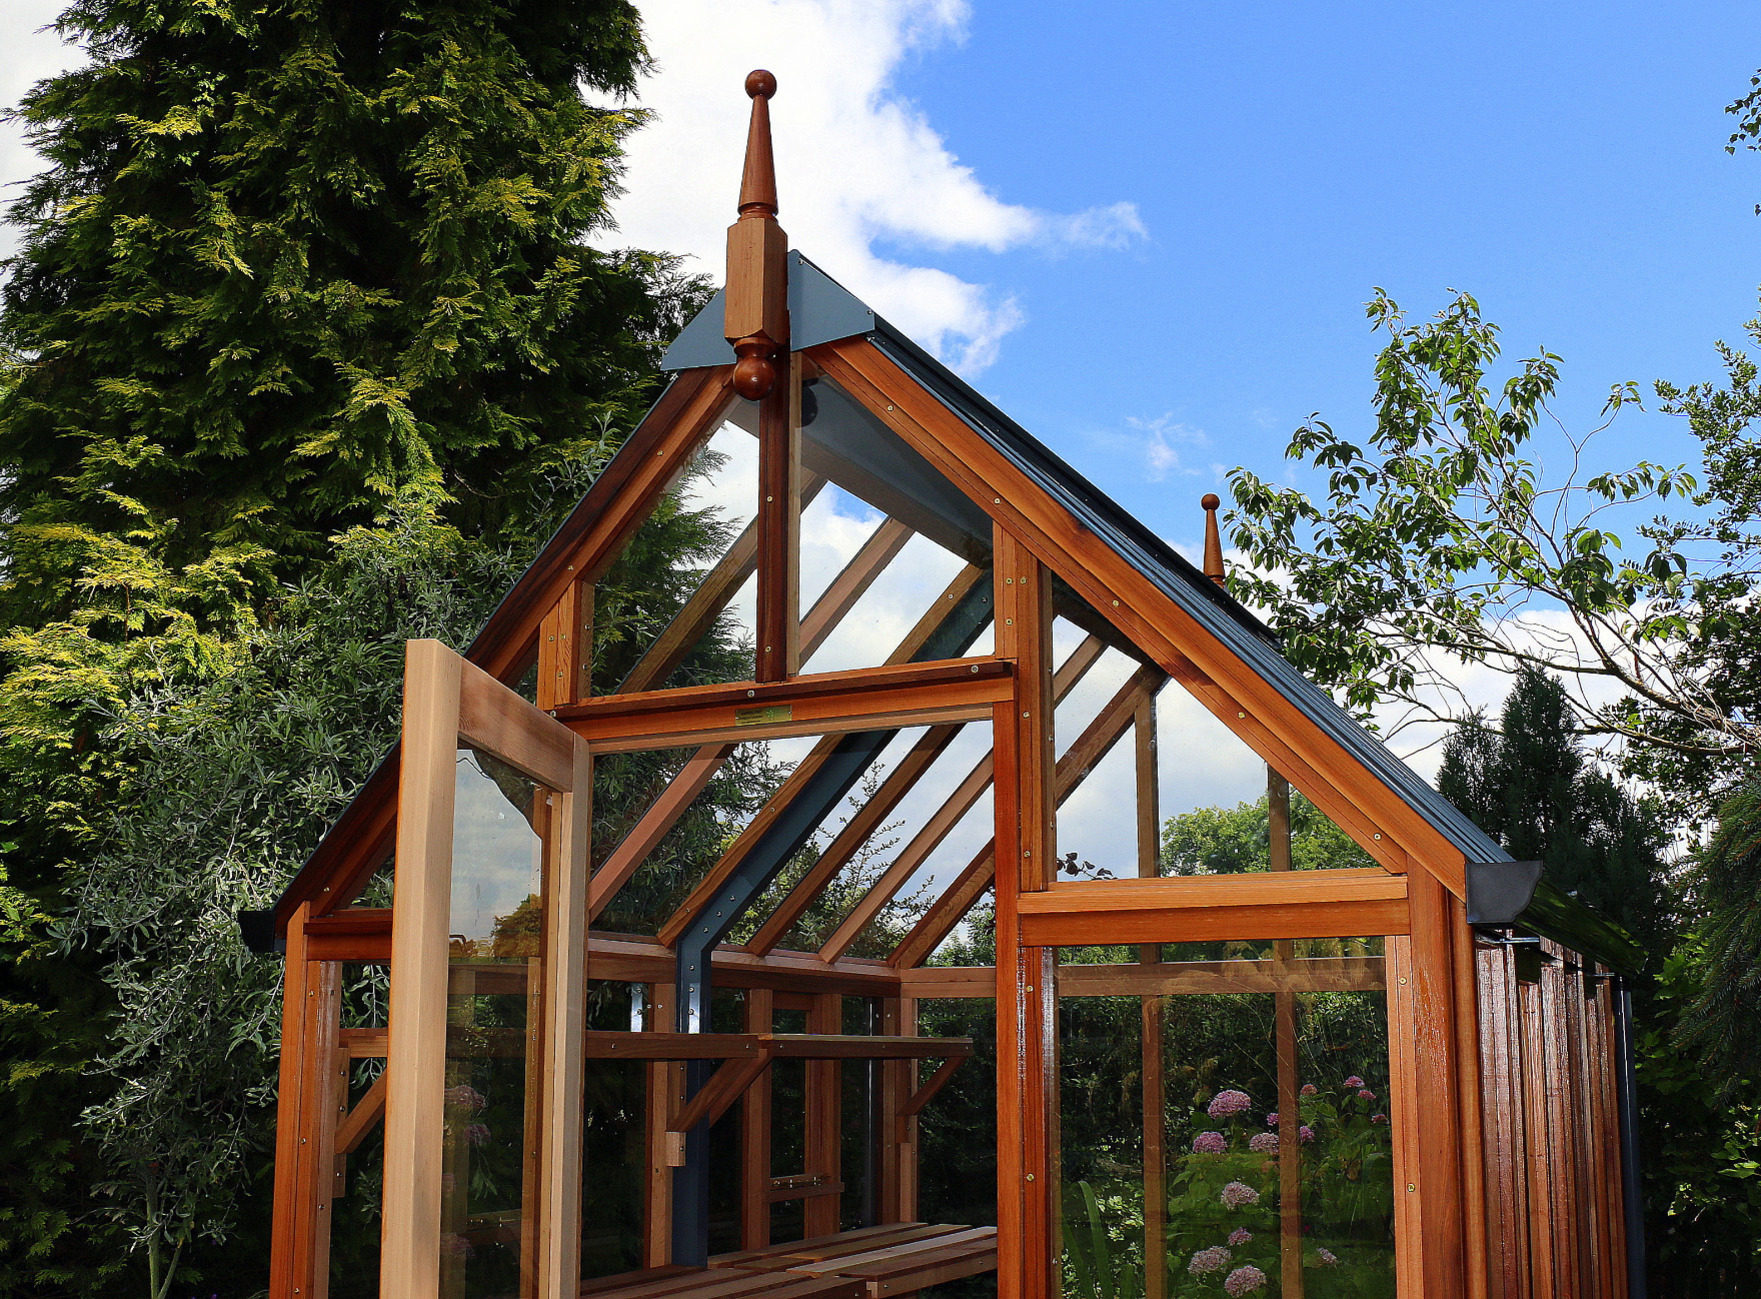 RHS Rosemoor Greenhouse with cedar base panels - traditional Victorian timber Greenhouse